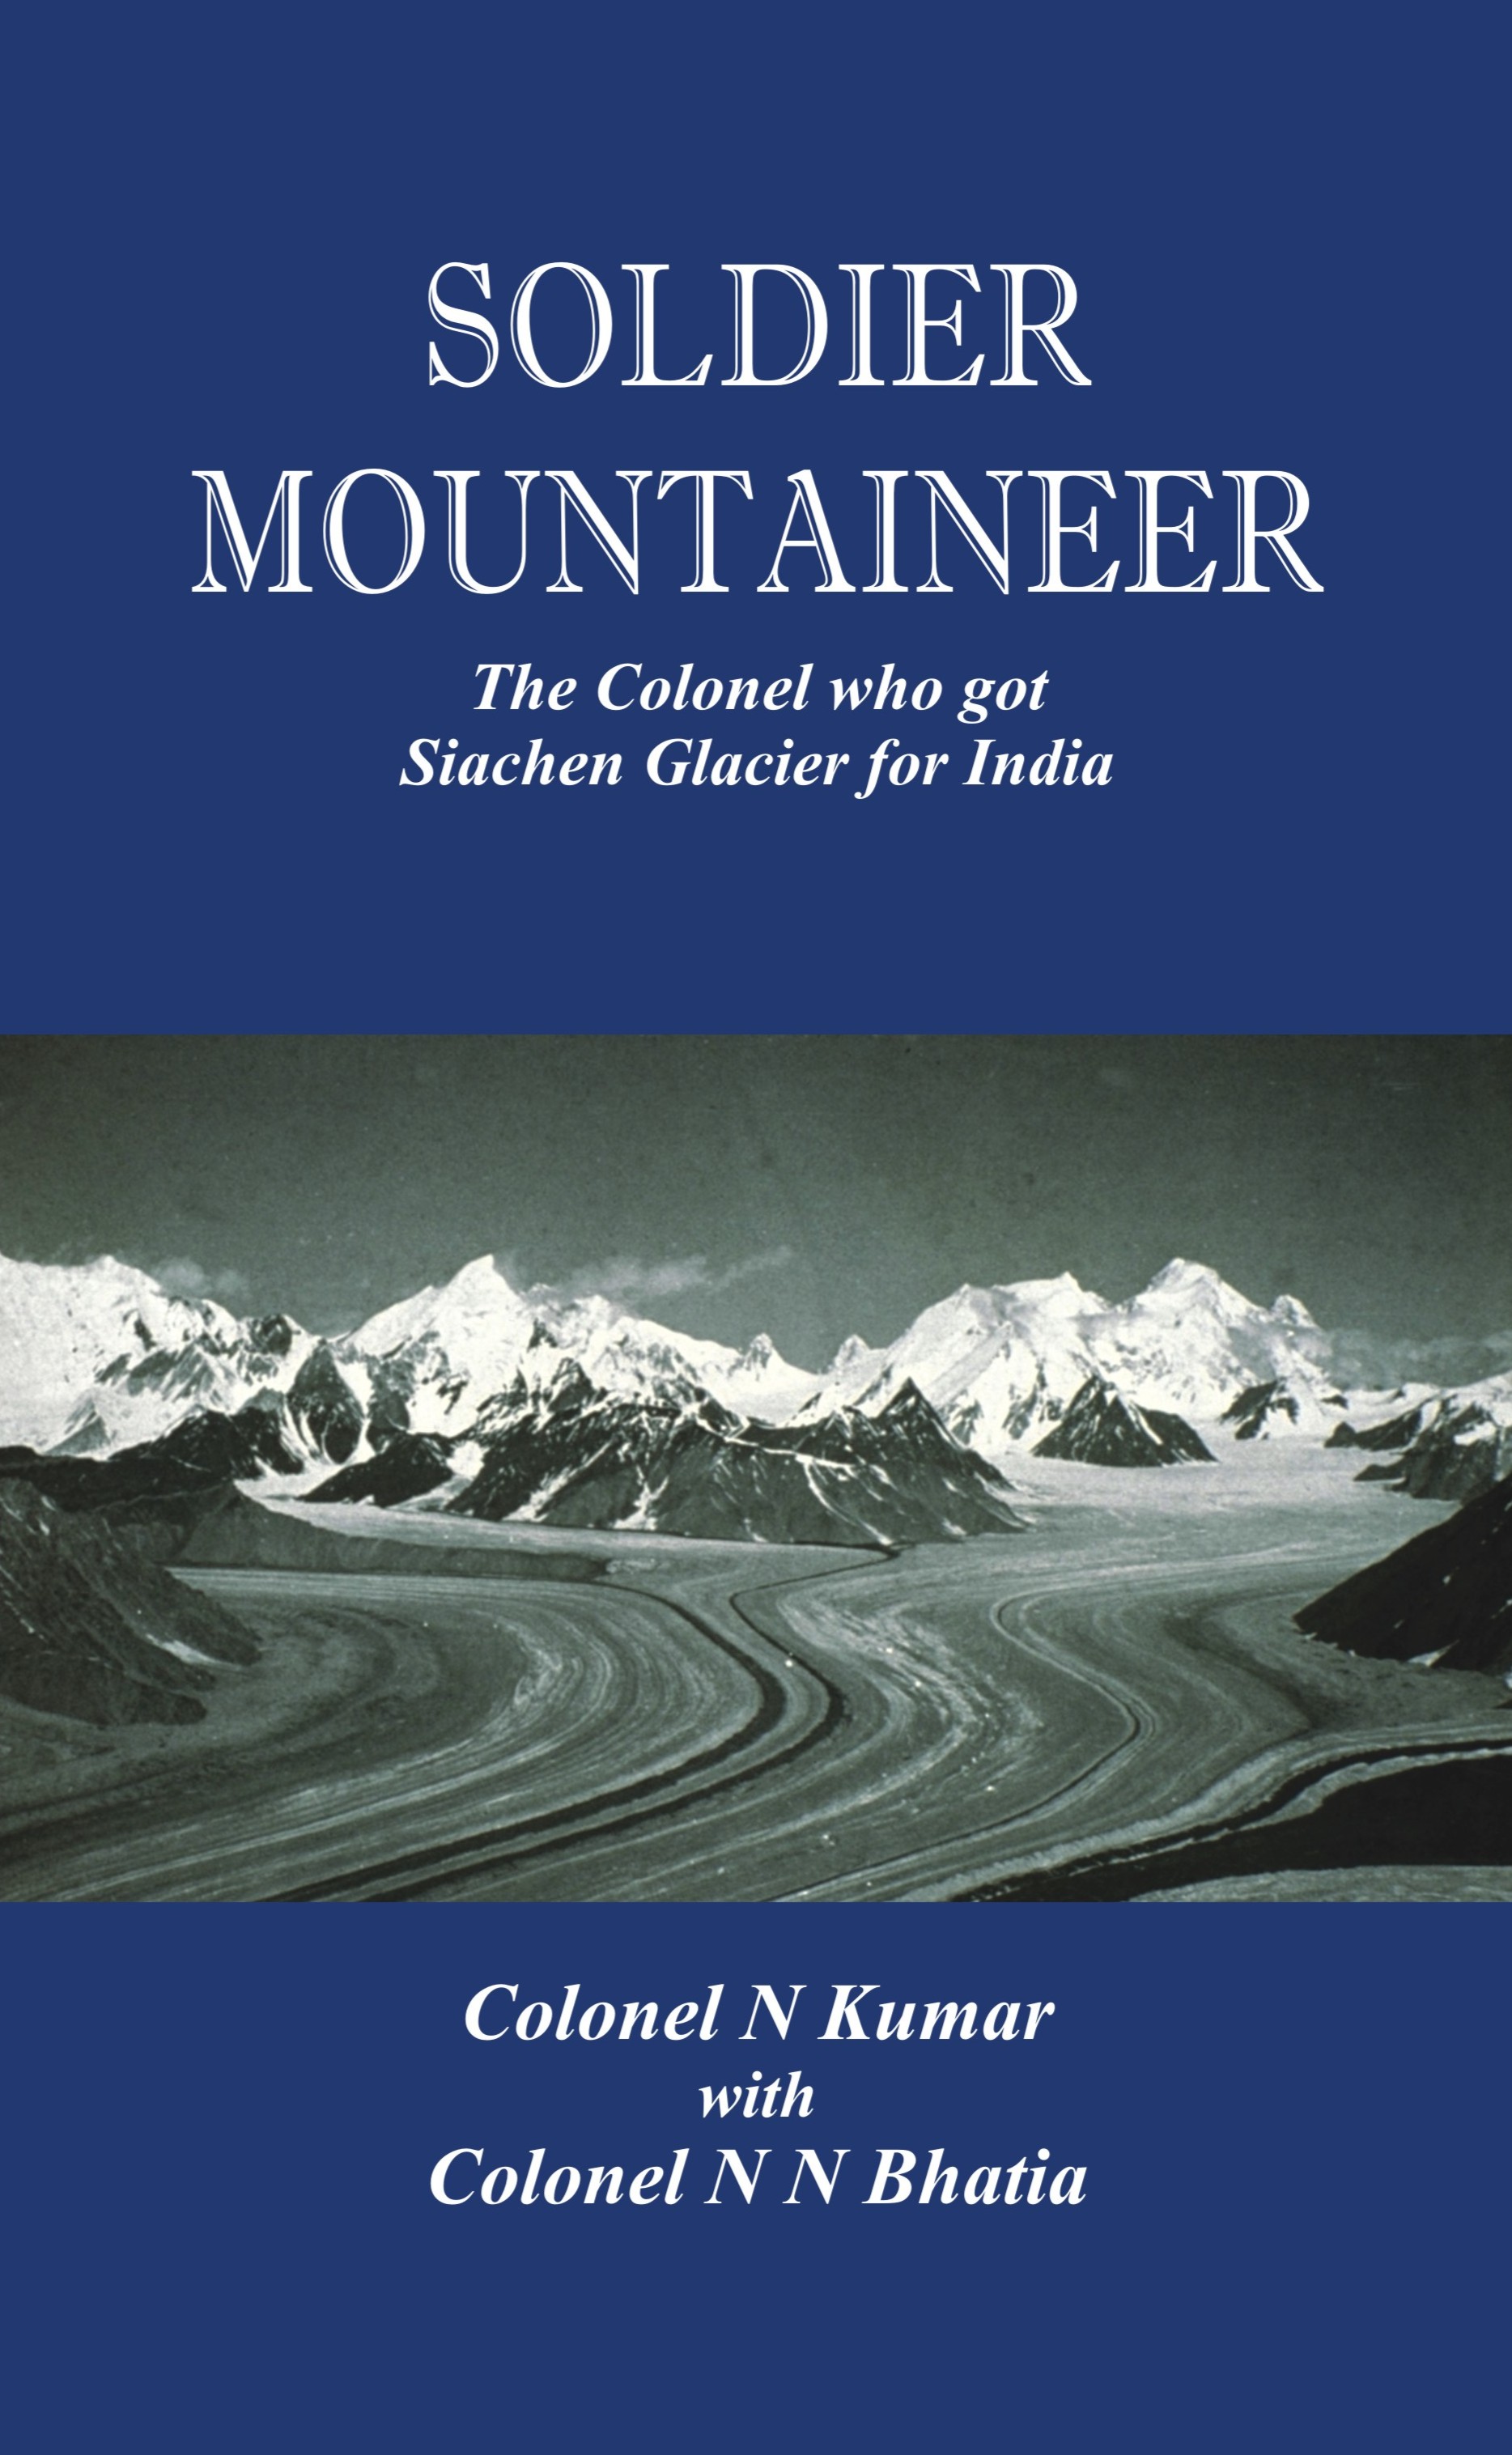 Soldier Mountaineer - The Colonel who got Siachen Glacier for India